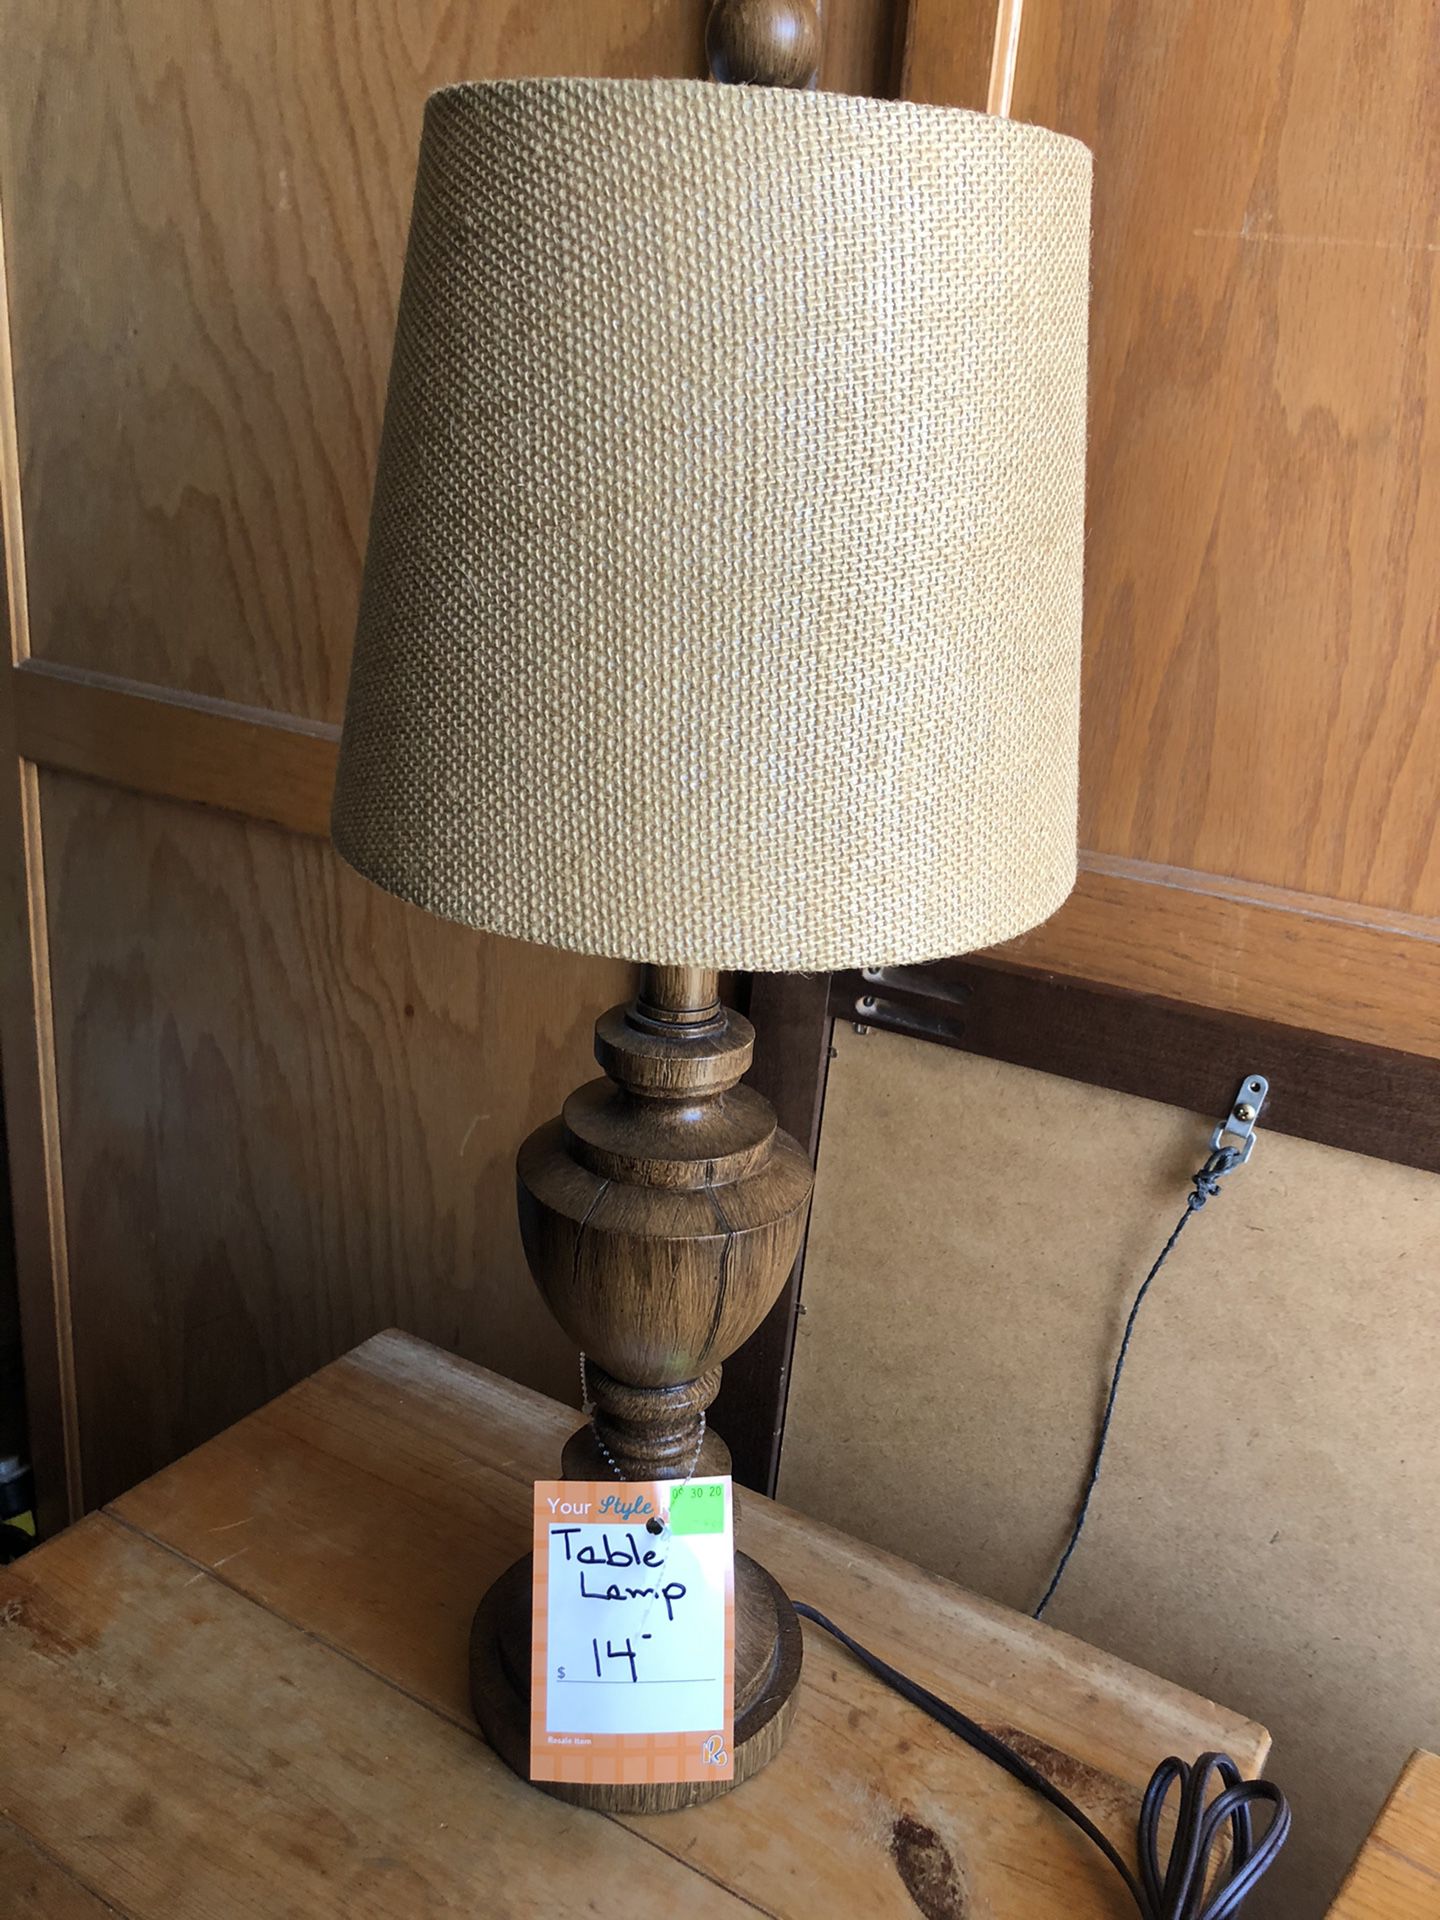 Wood grain table lamp with brown shade